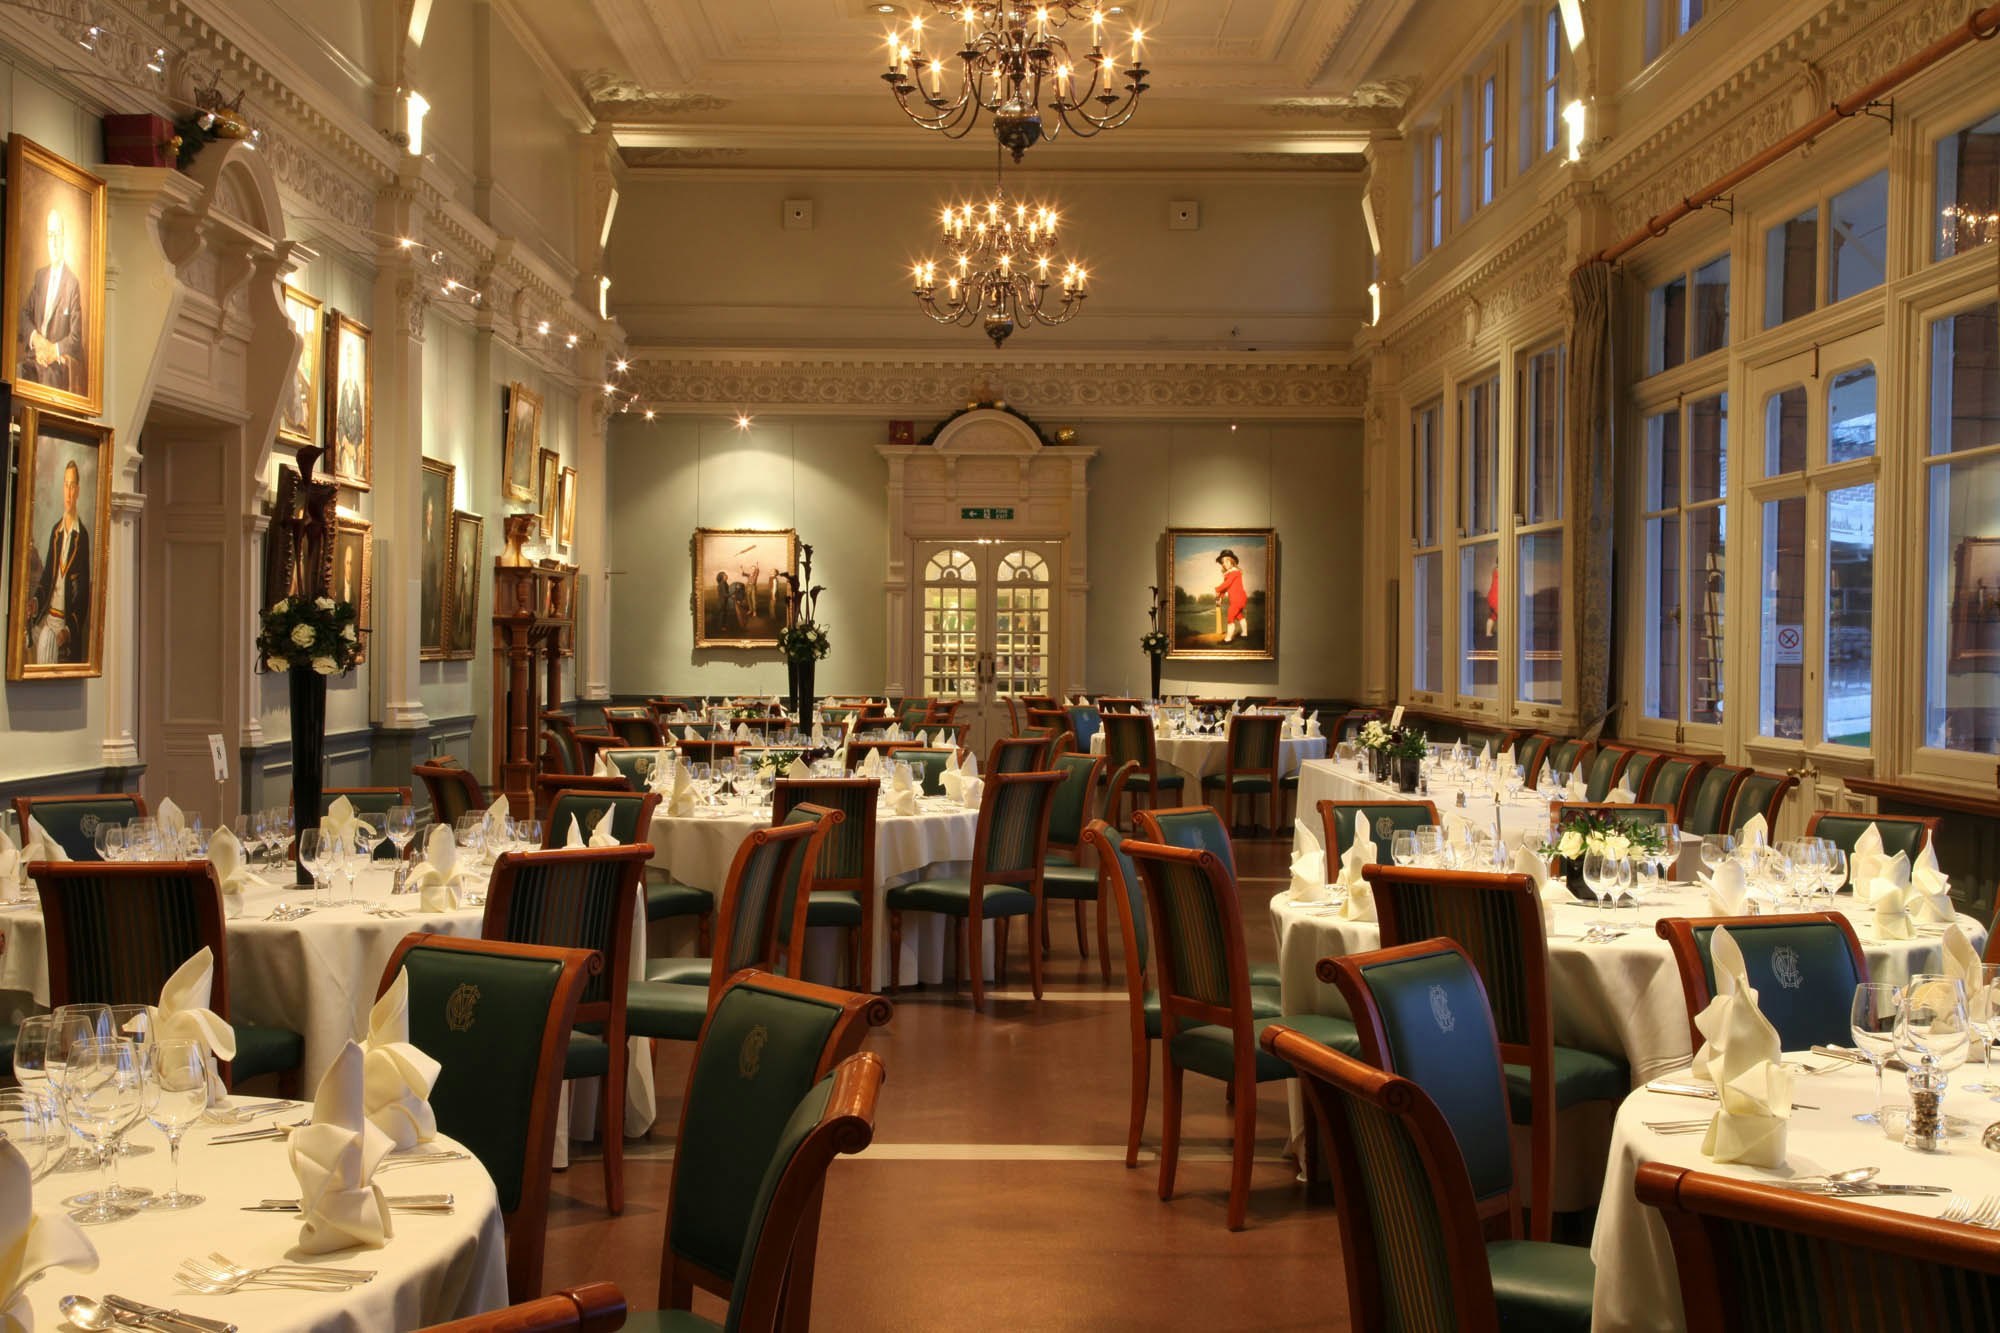 Gala Dinner Venues in London - Lord's Cricket Ground